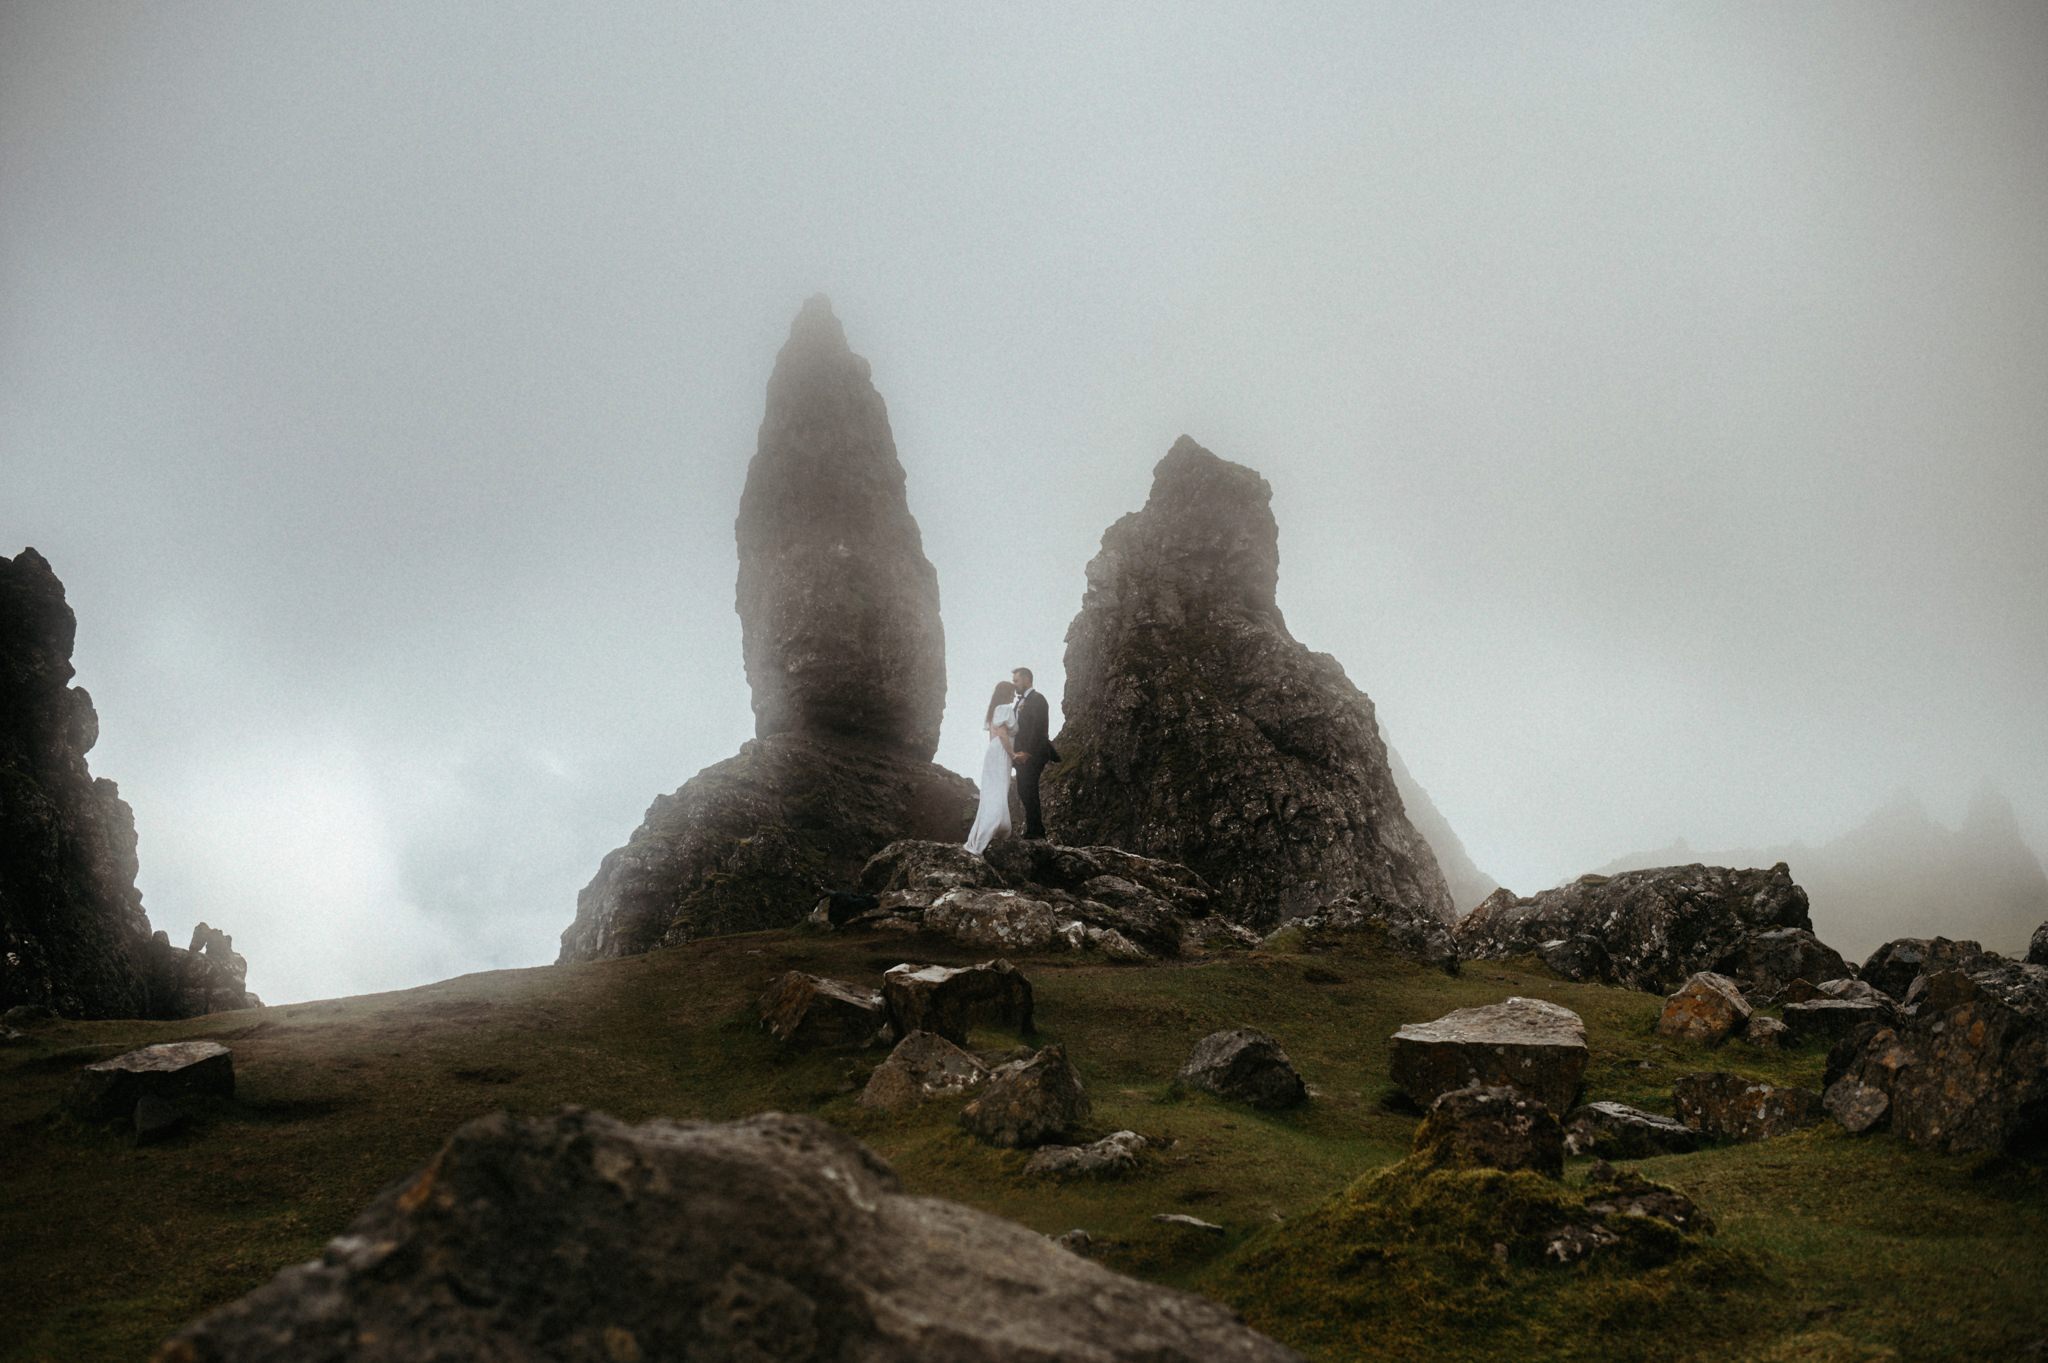 Elopement in Scotland at the Old man of storr on the isle of skye with Bride and Groom kissing near the rocks